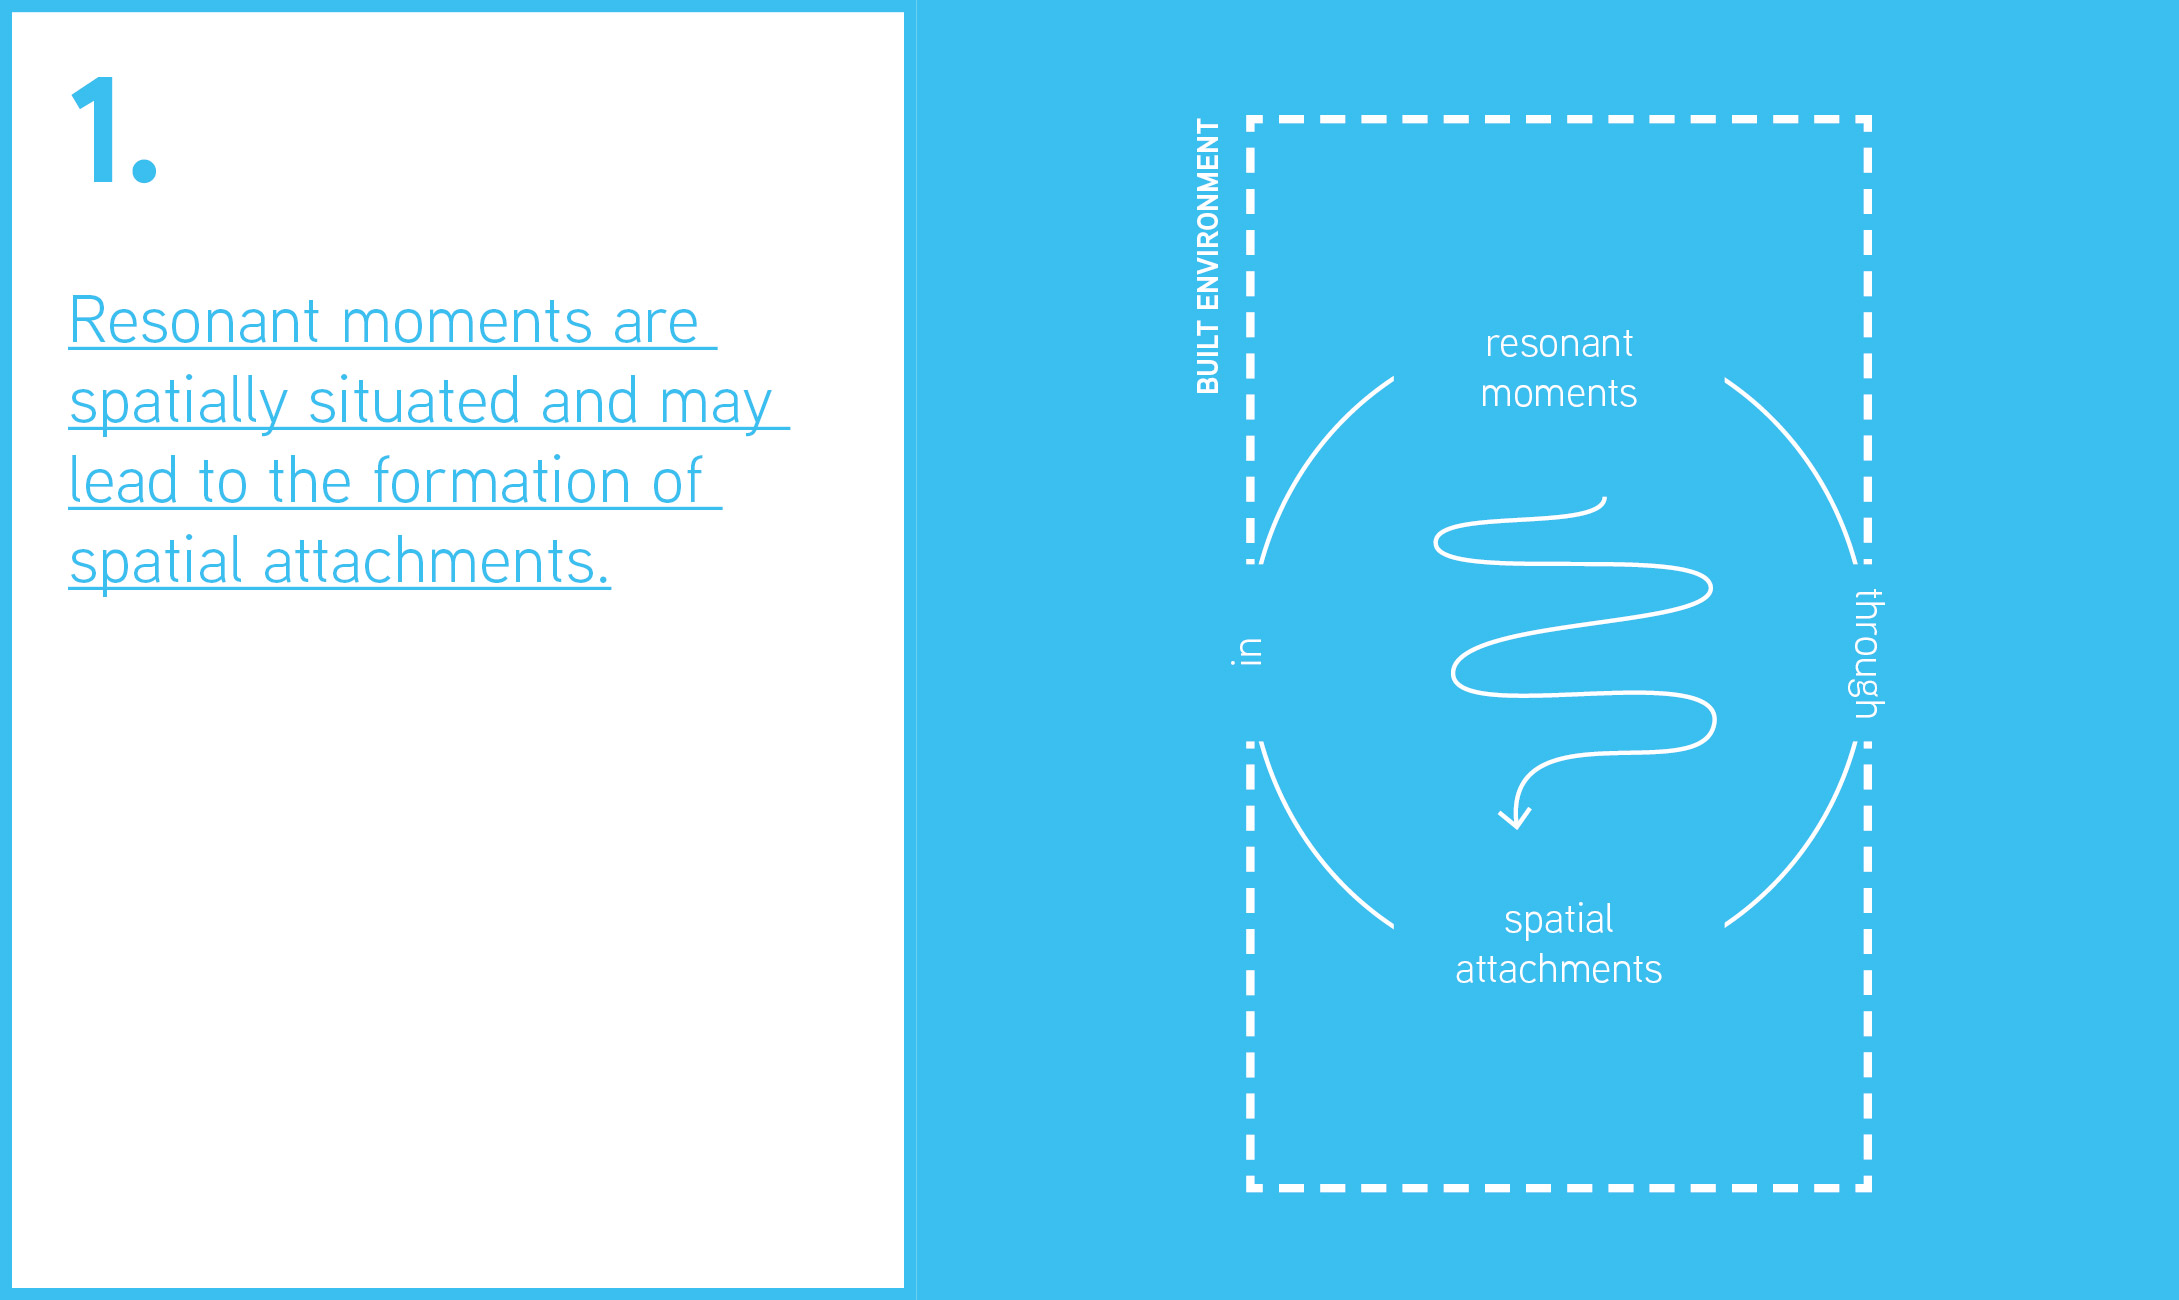 This figure shows the terms "resonant moments" and "spatial attachments" in their relation to each other. They are both situated within a rectangle with the term built environment. 